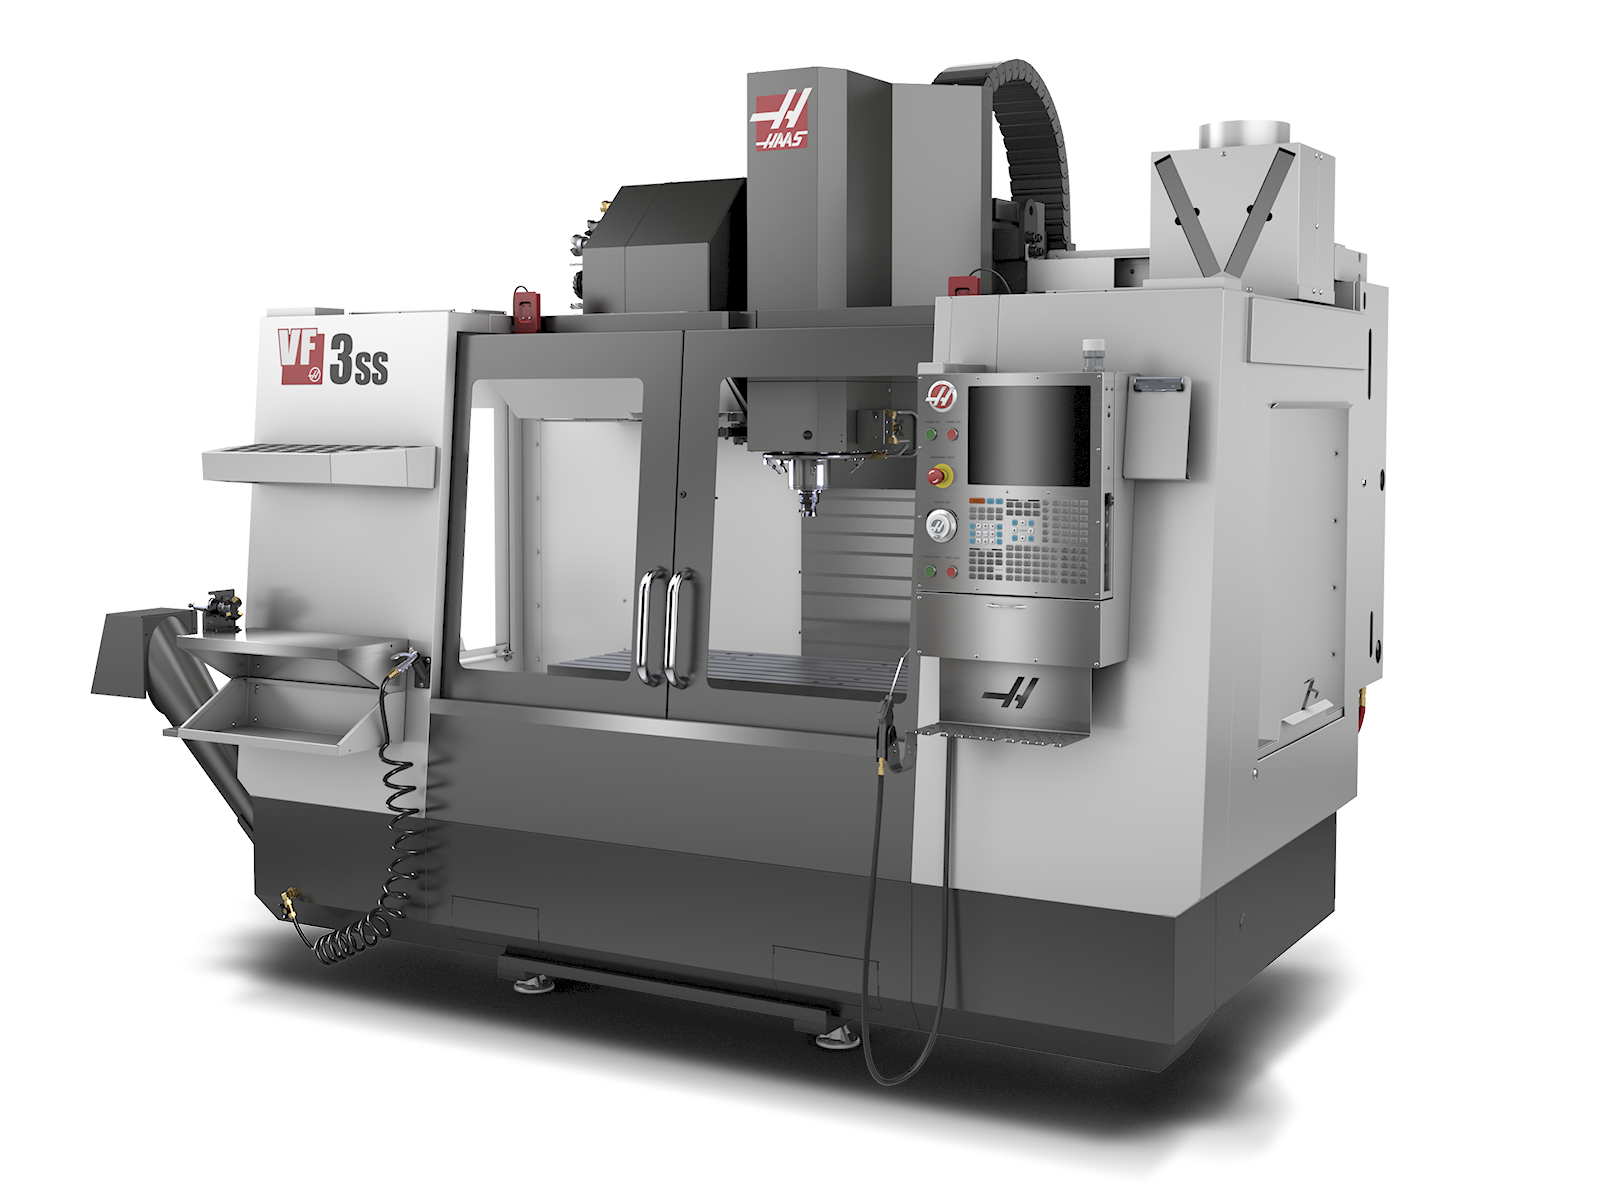 The Haas VF-3SS